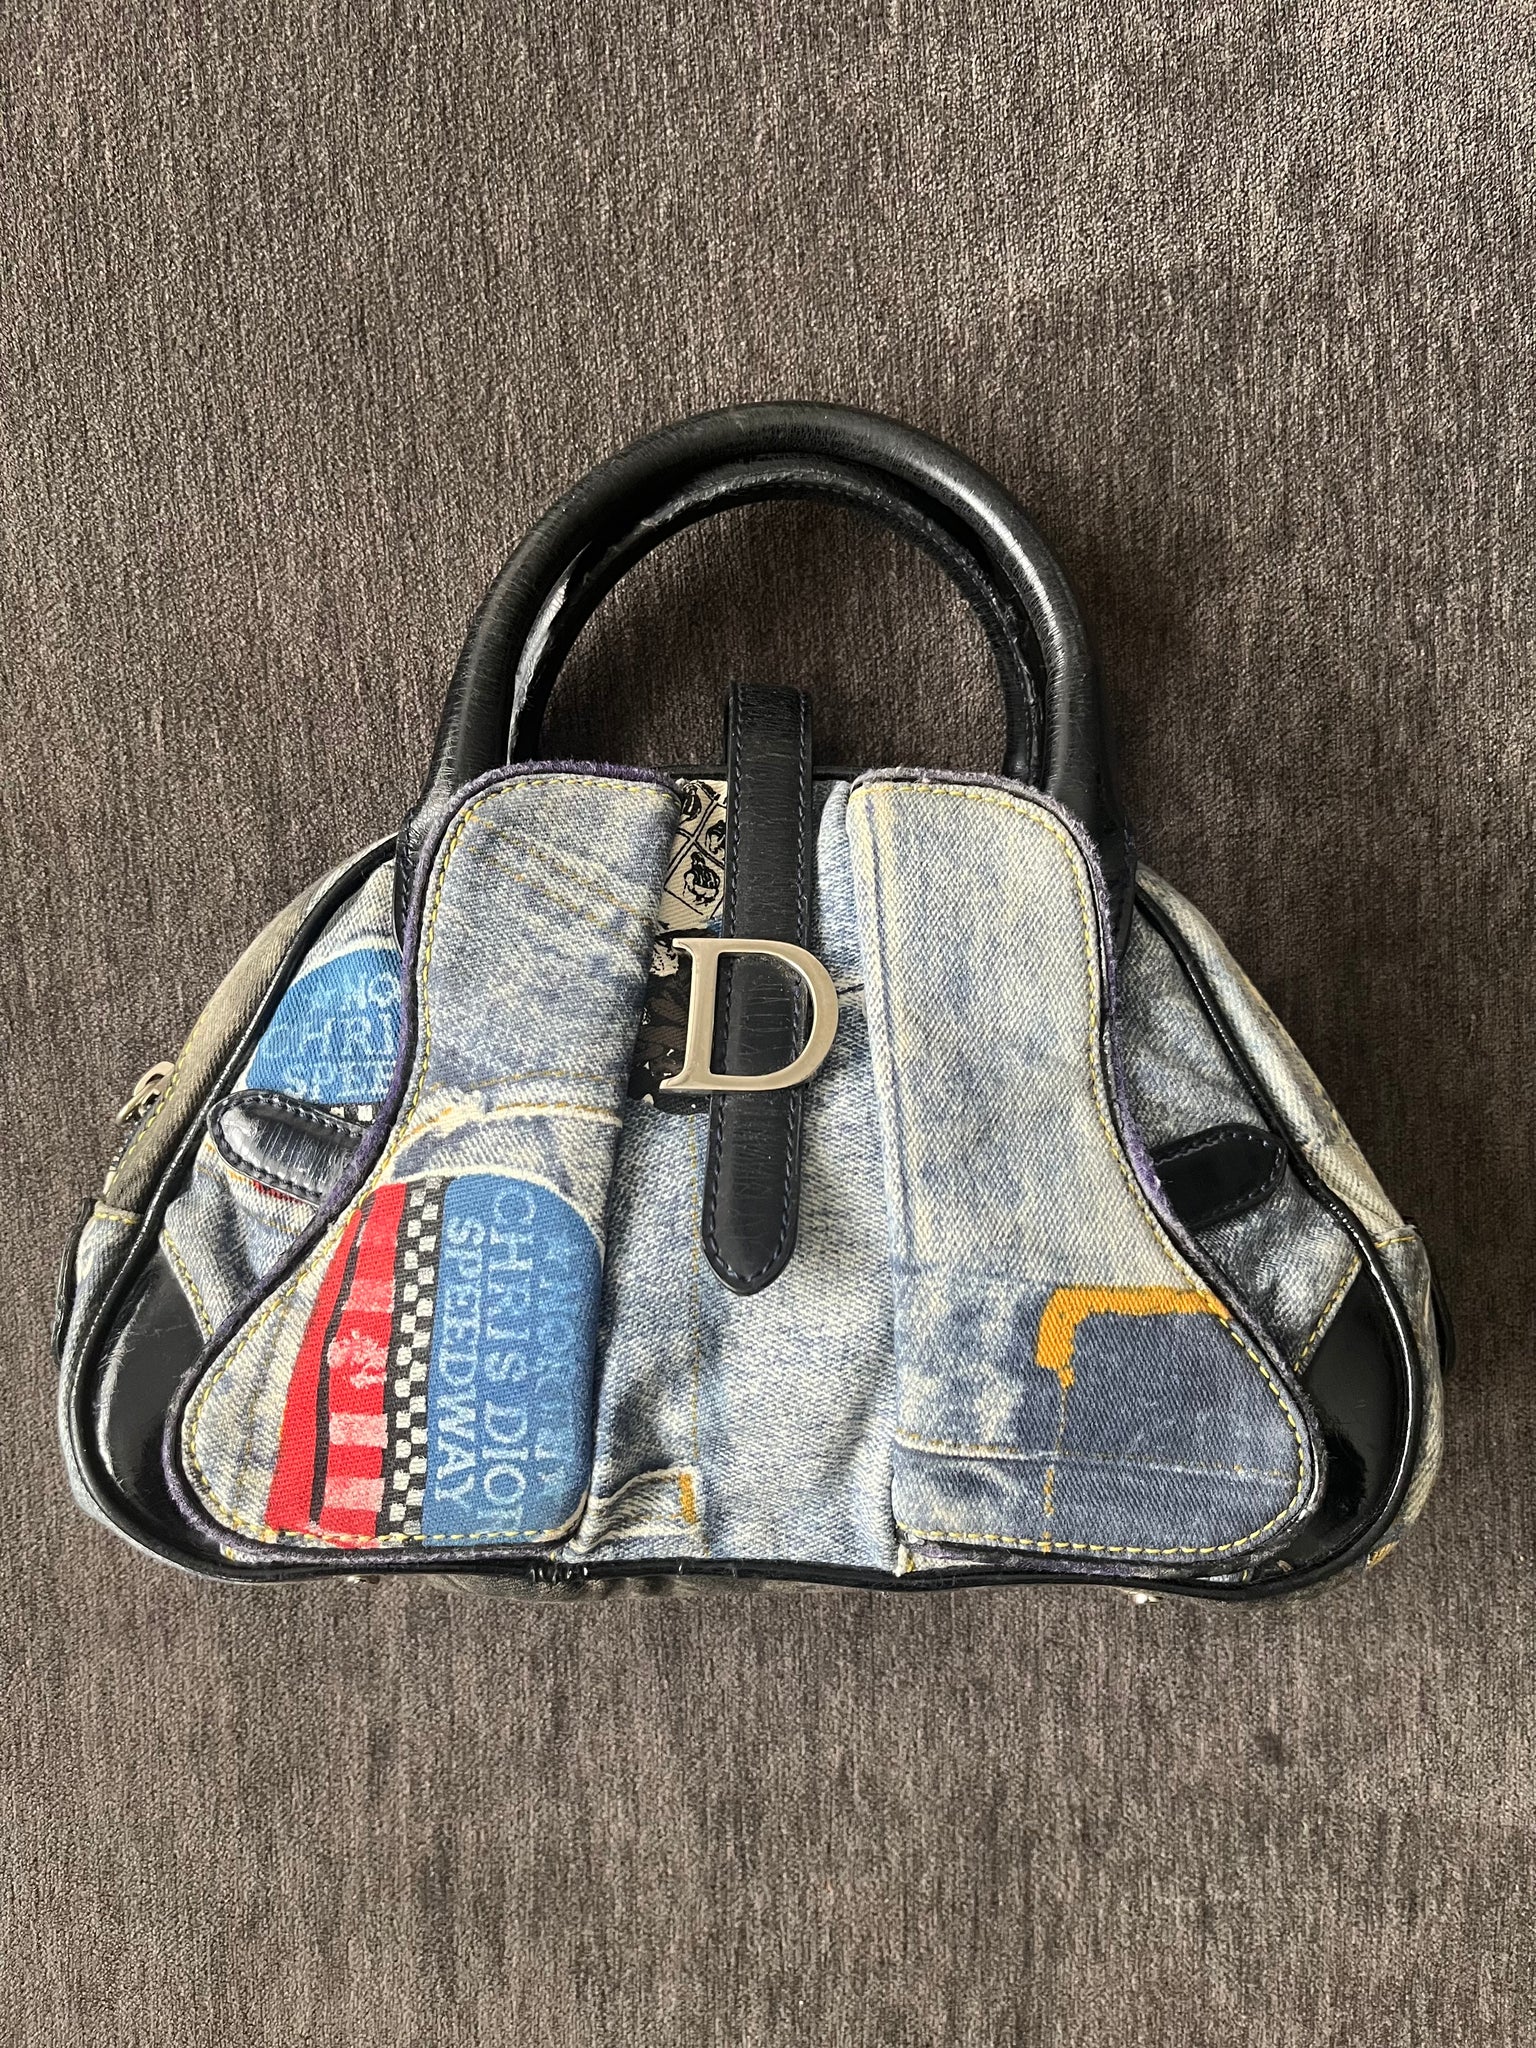 Dior presents the savoirfaire of the Dior Vibe bowling bag  News and  Events  News  Défilés  DIOR US